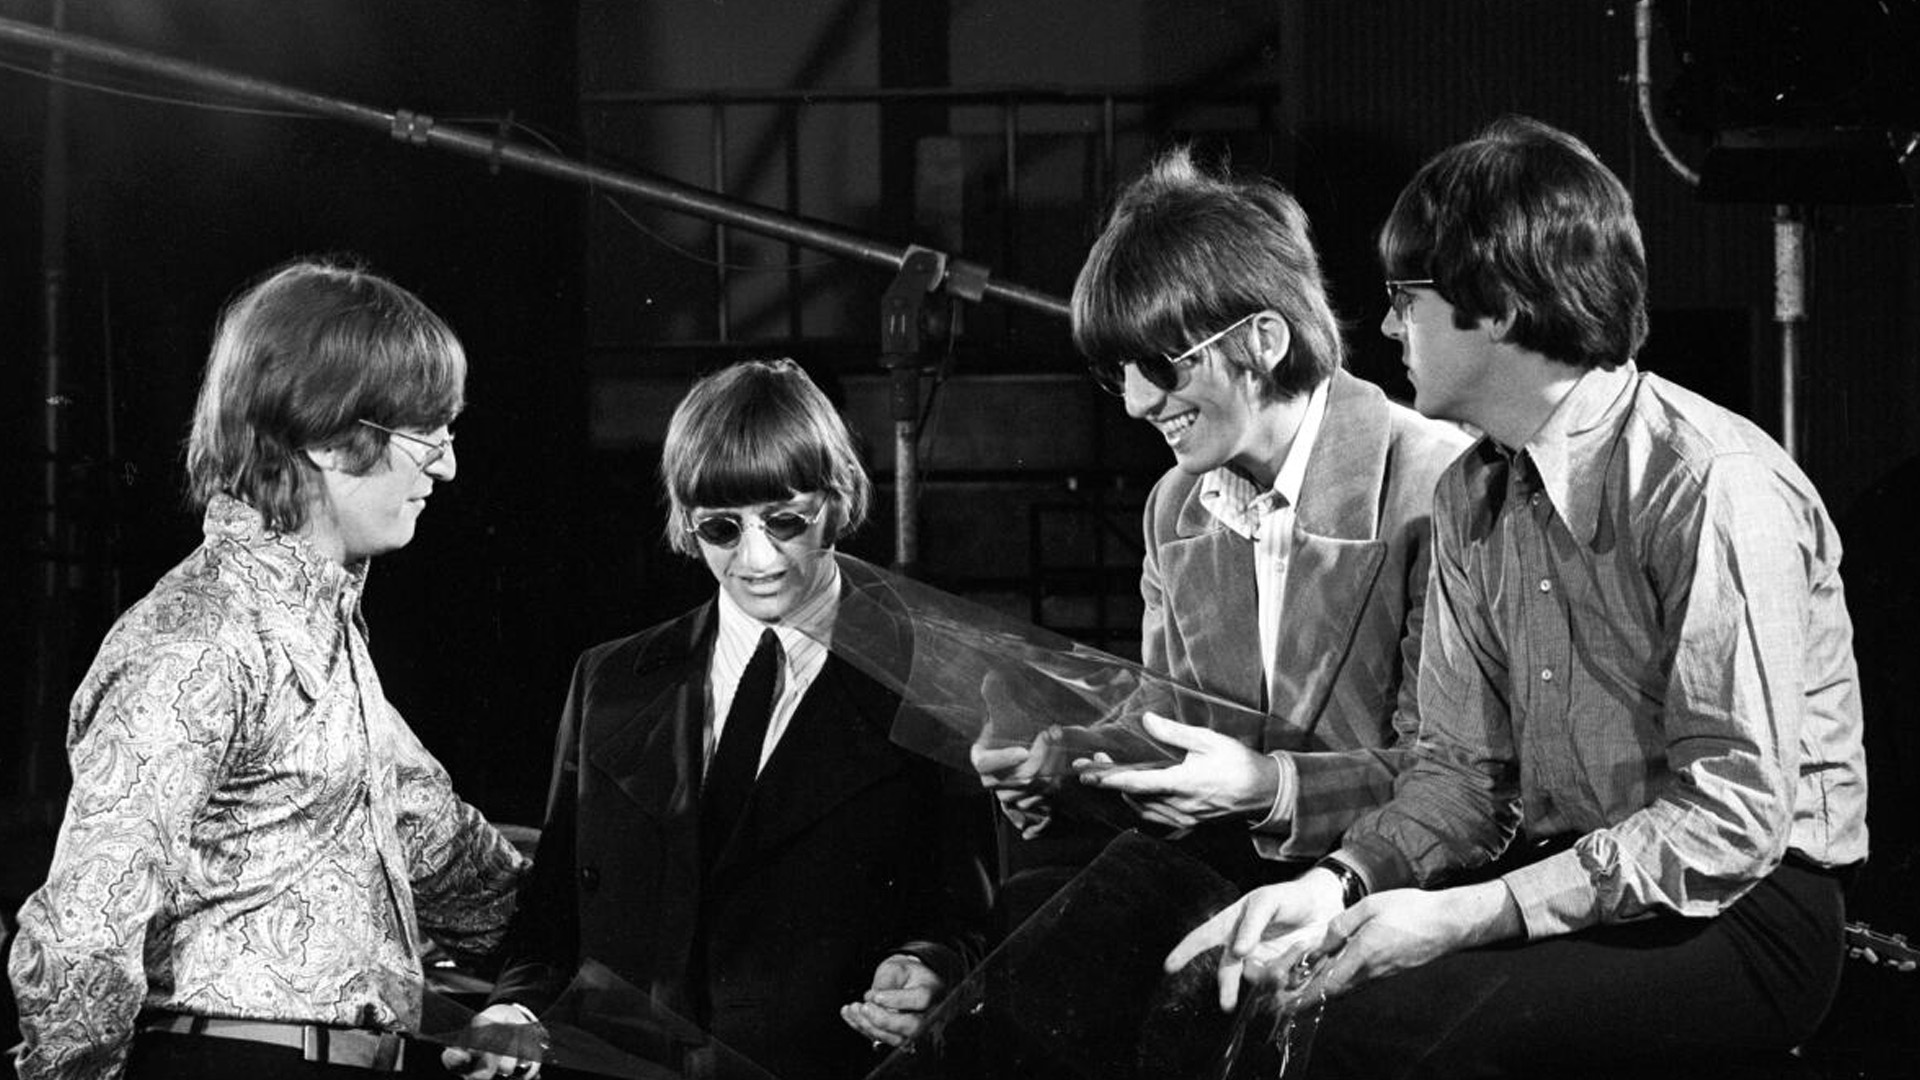 The Beatles Release 'Final Song' Featuring All Four Members - "Now And Then"